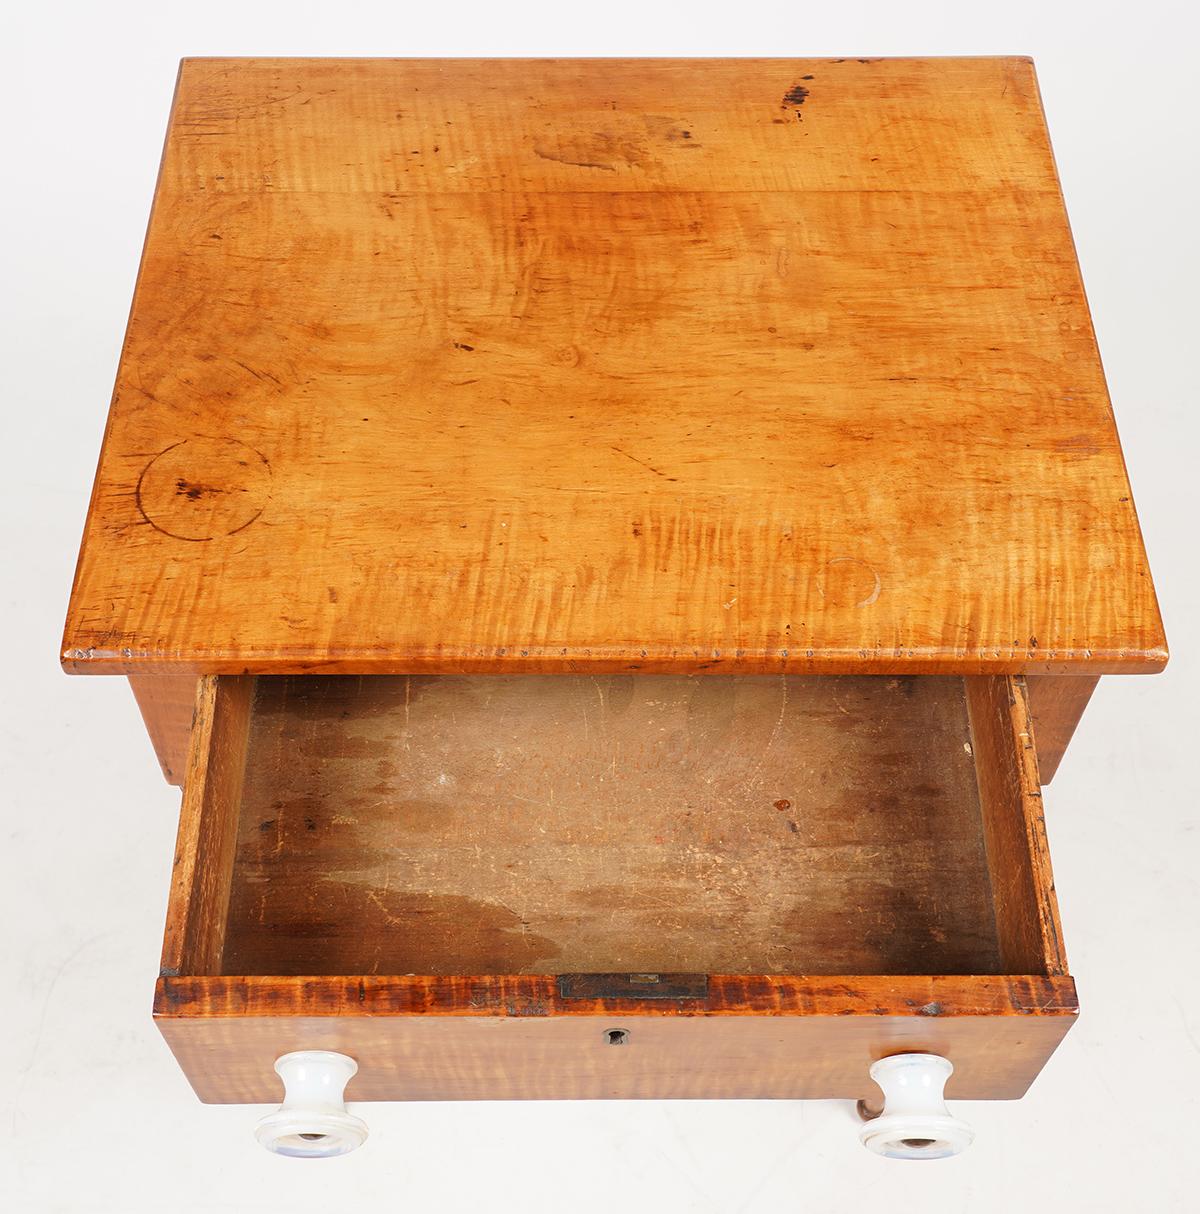 19th Century Early American Federal Tiger Maple One-Drawer Work Table or Stand, circa 1830